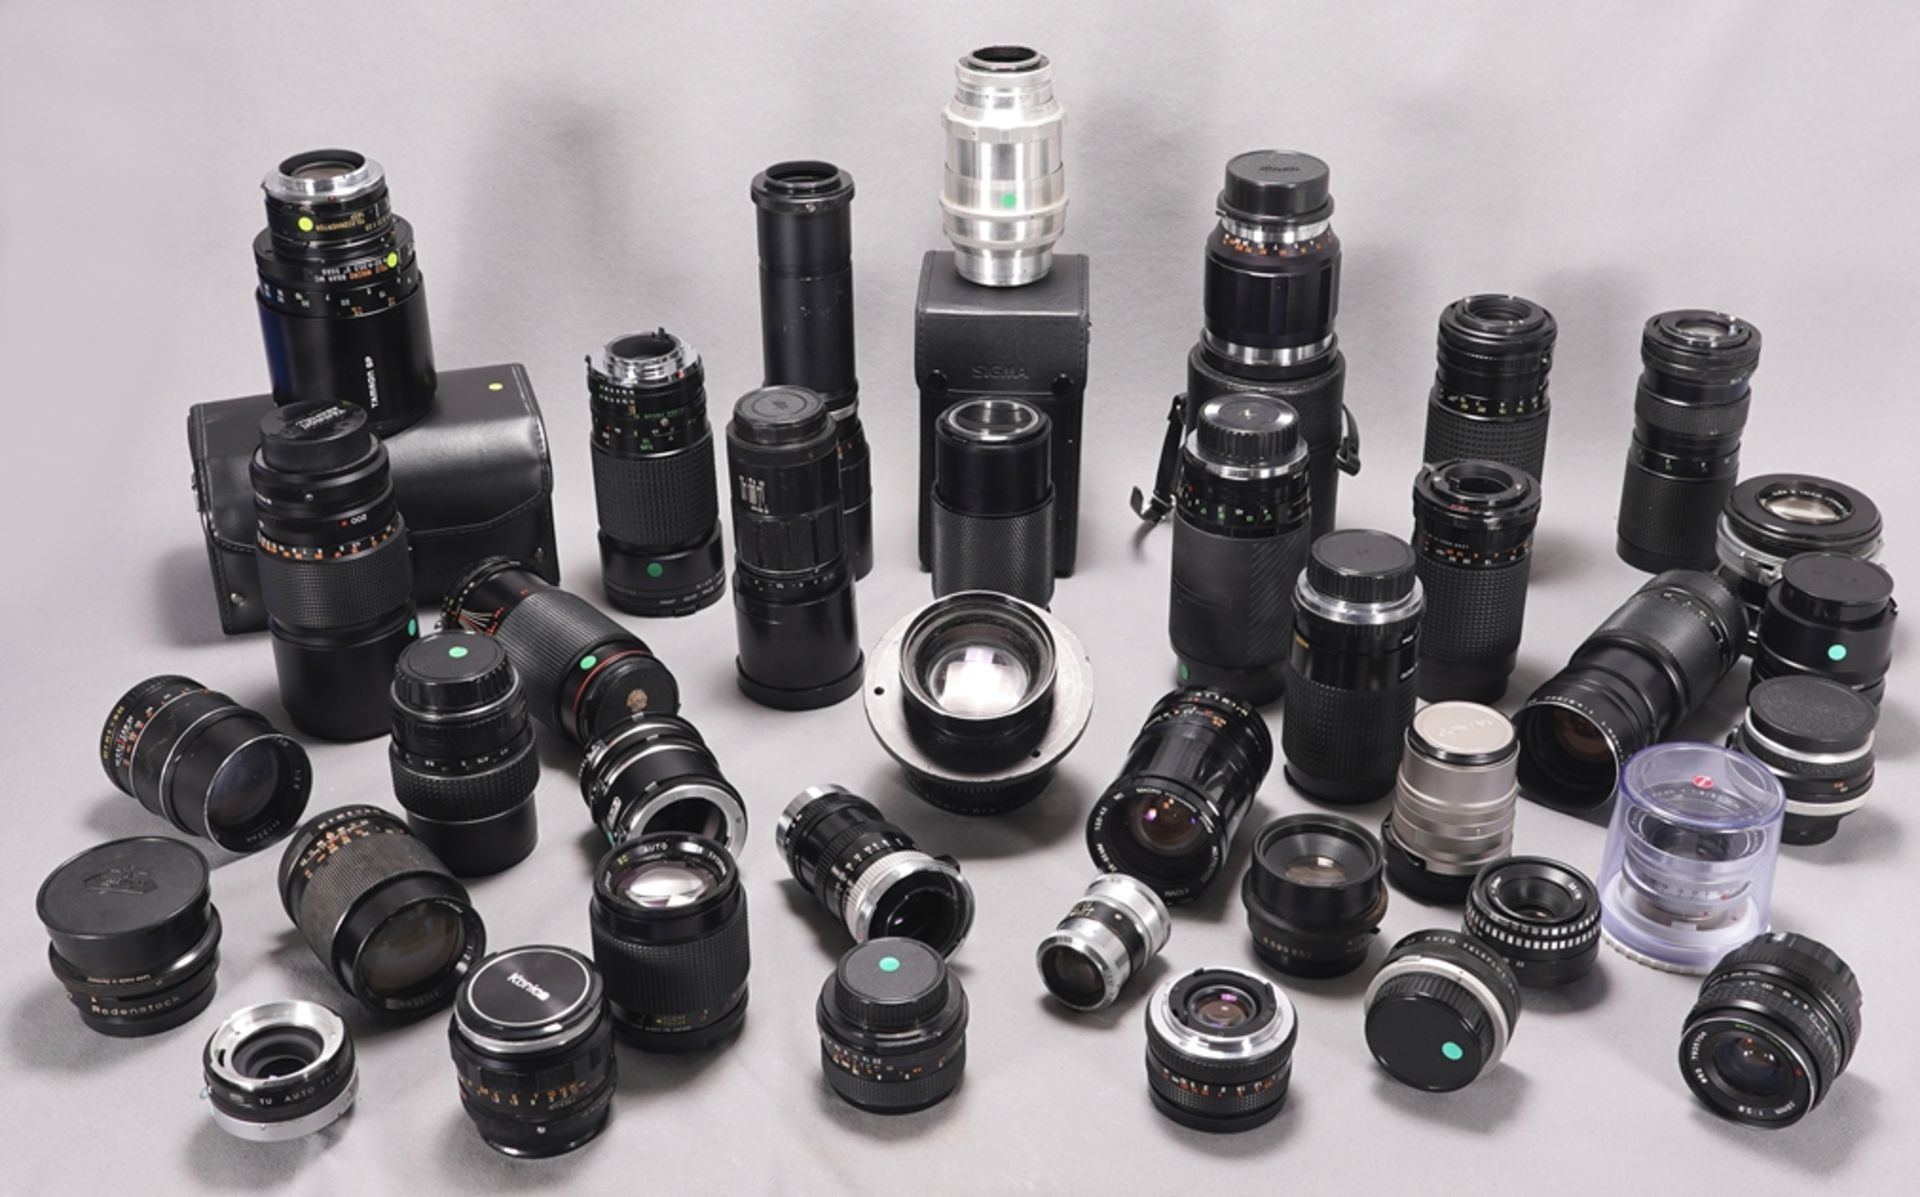 Large collection of lenses